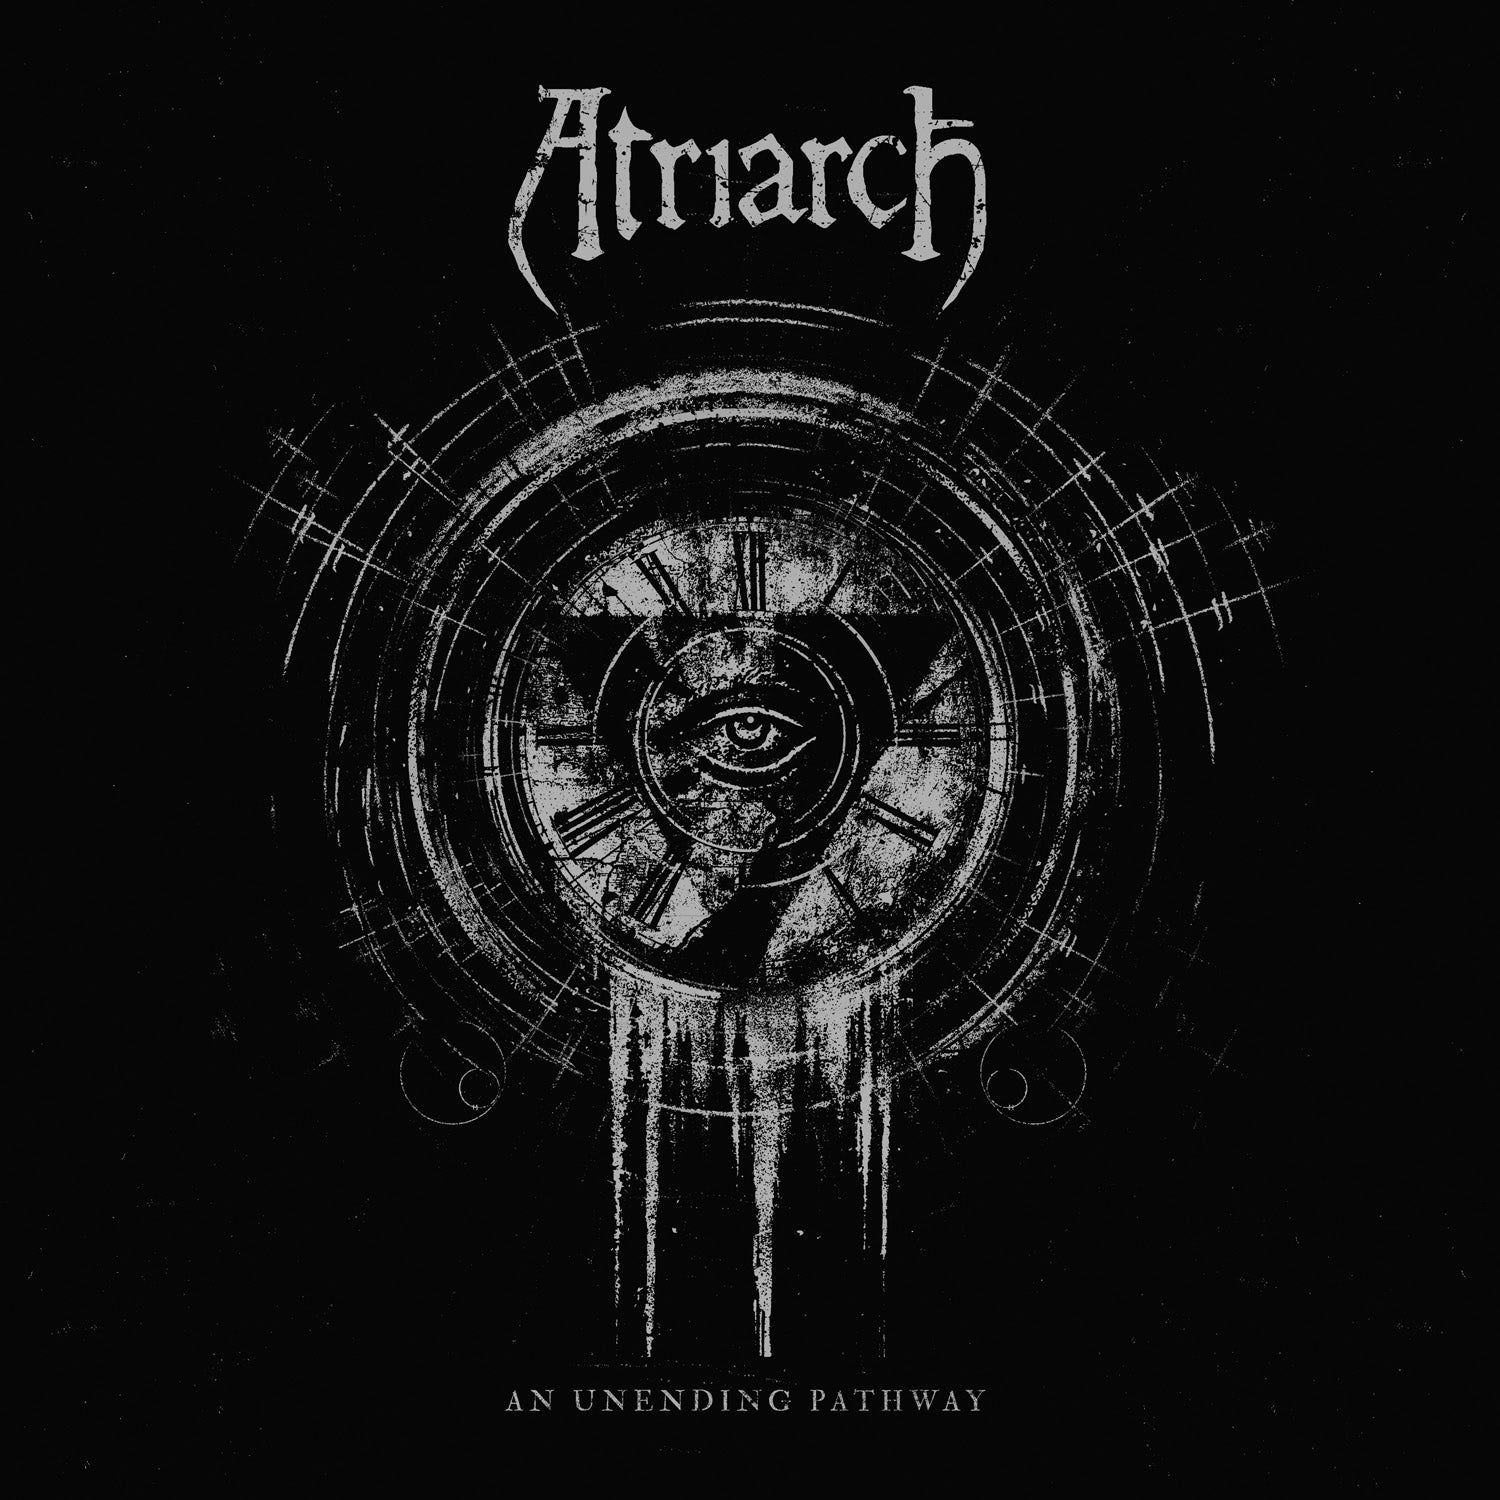 Atriarch "An Unending Pathway" CD